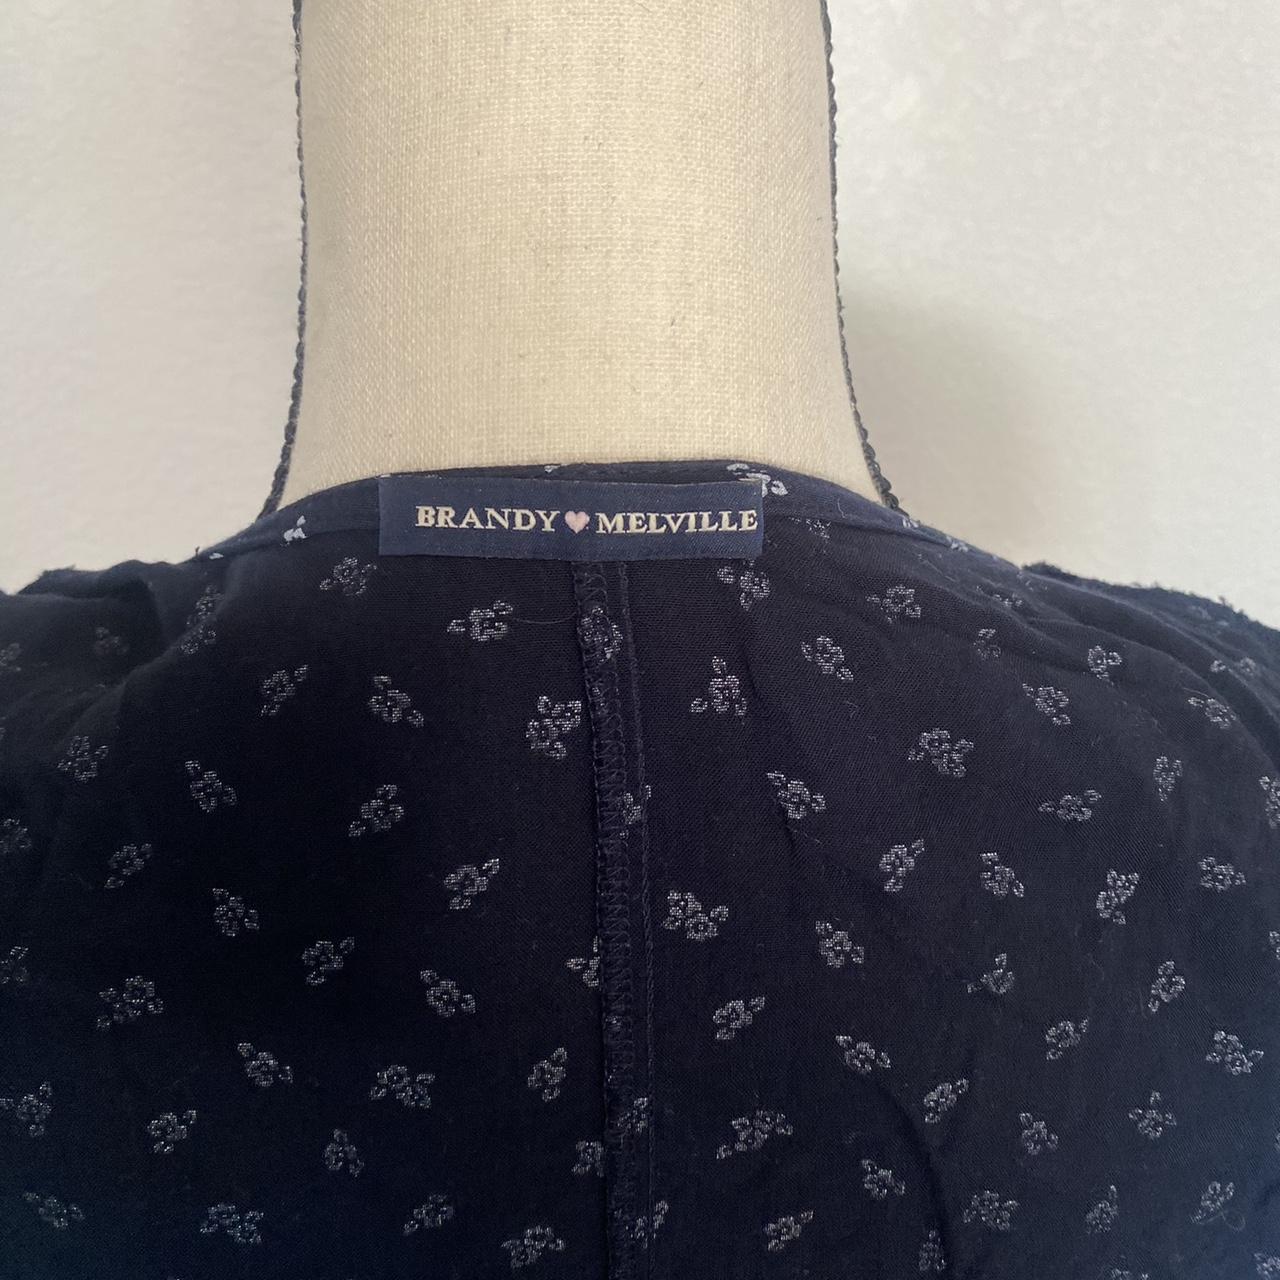 Brandy Melville Robbie Made in Italy Wrap Navy White Floral Wrap Mini Dress